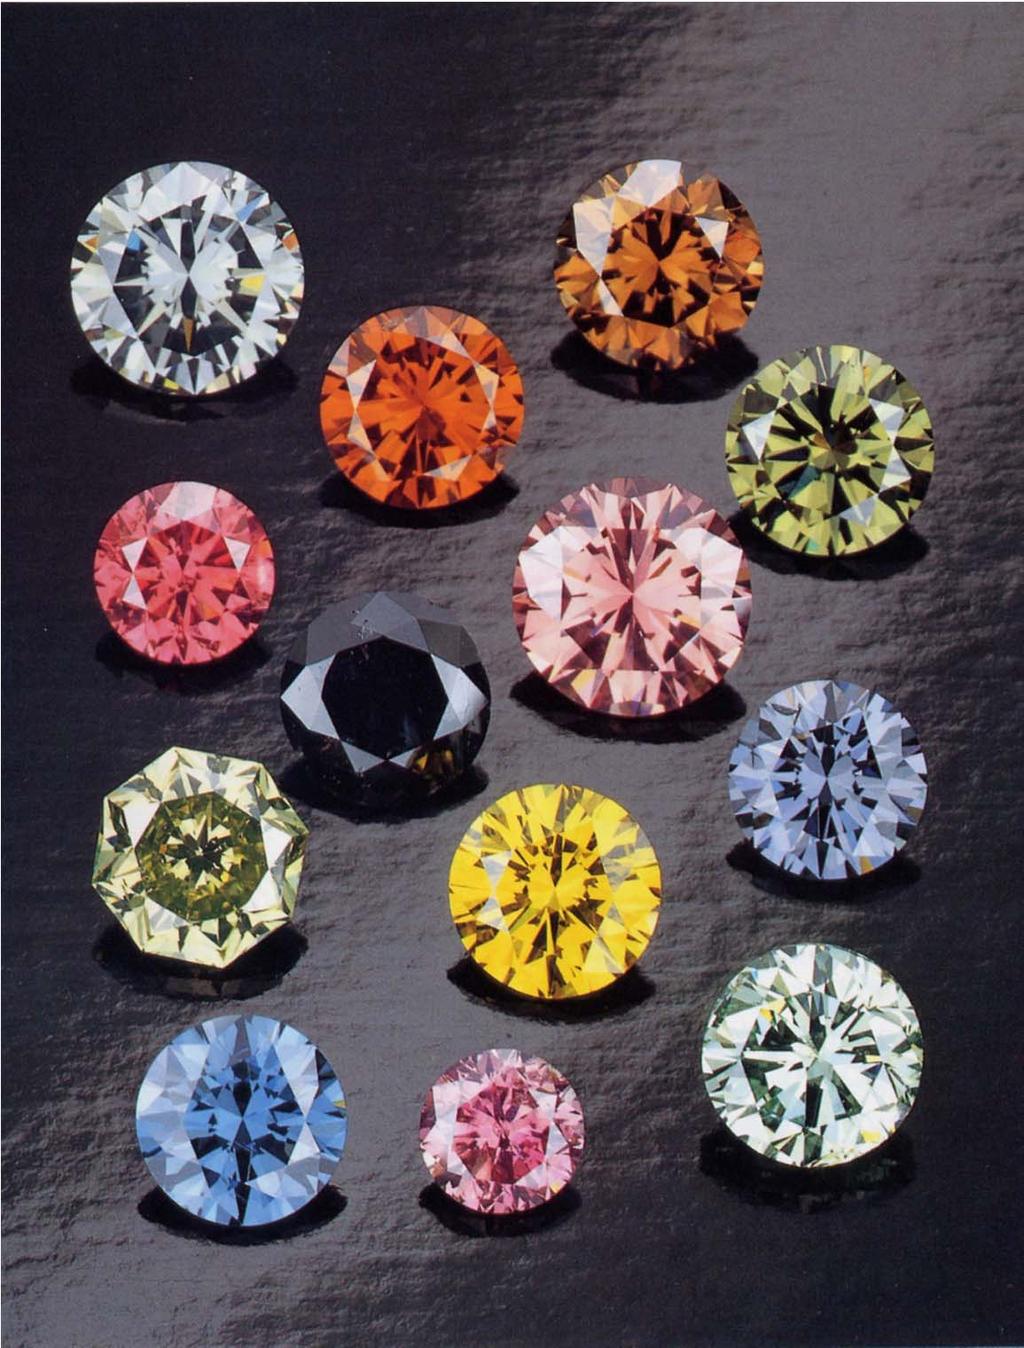 Colored Diamonds There are 13 basic color varieties of Colored Diamonds.